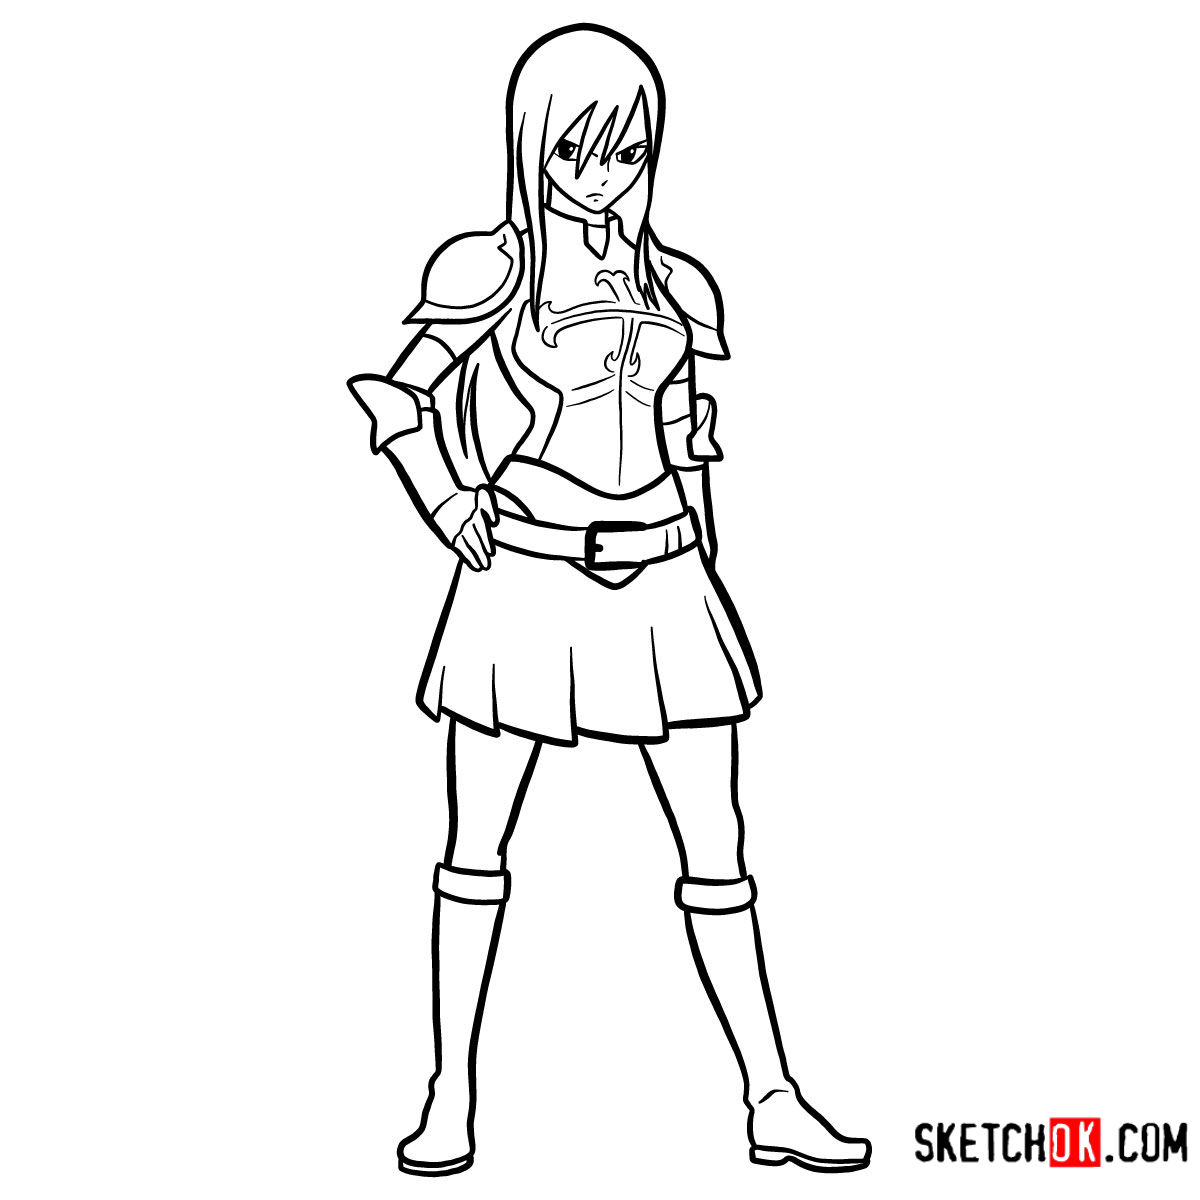 15 steps drawing tutorial of Erza Scarlet (fairy tail)